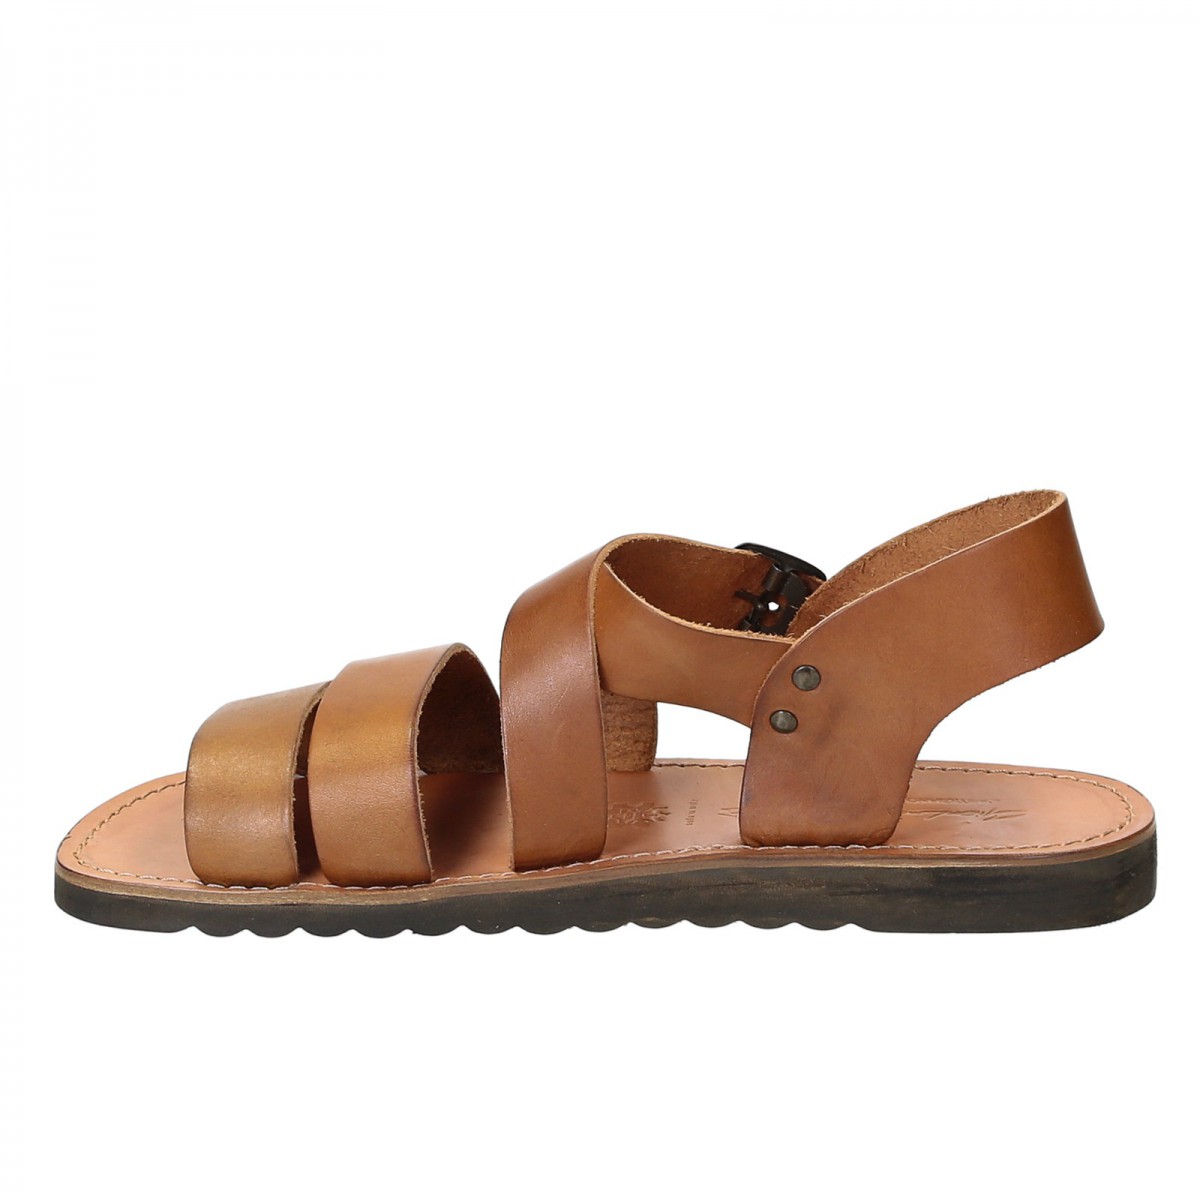 Handmade in Italy mens sandals in brown leather | The leather craftsmen